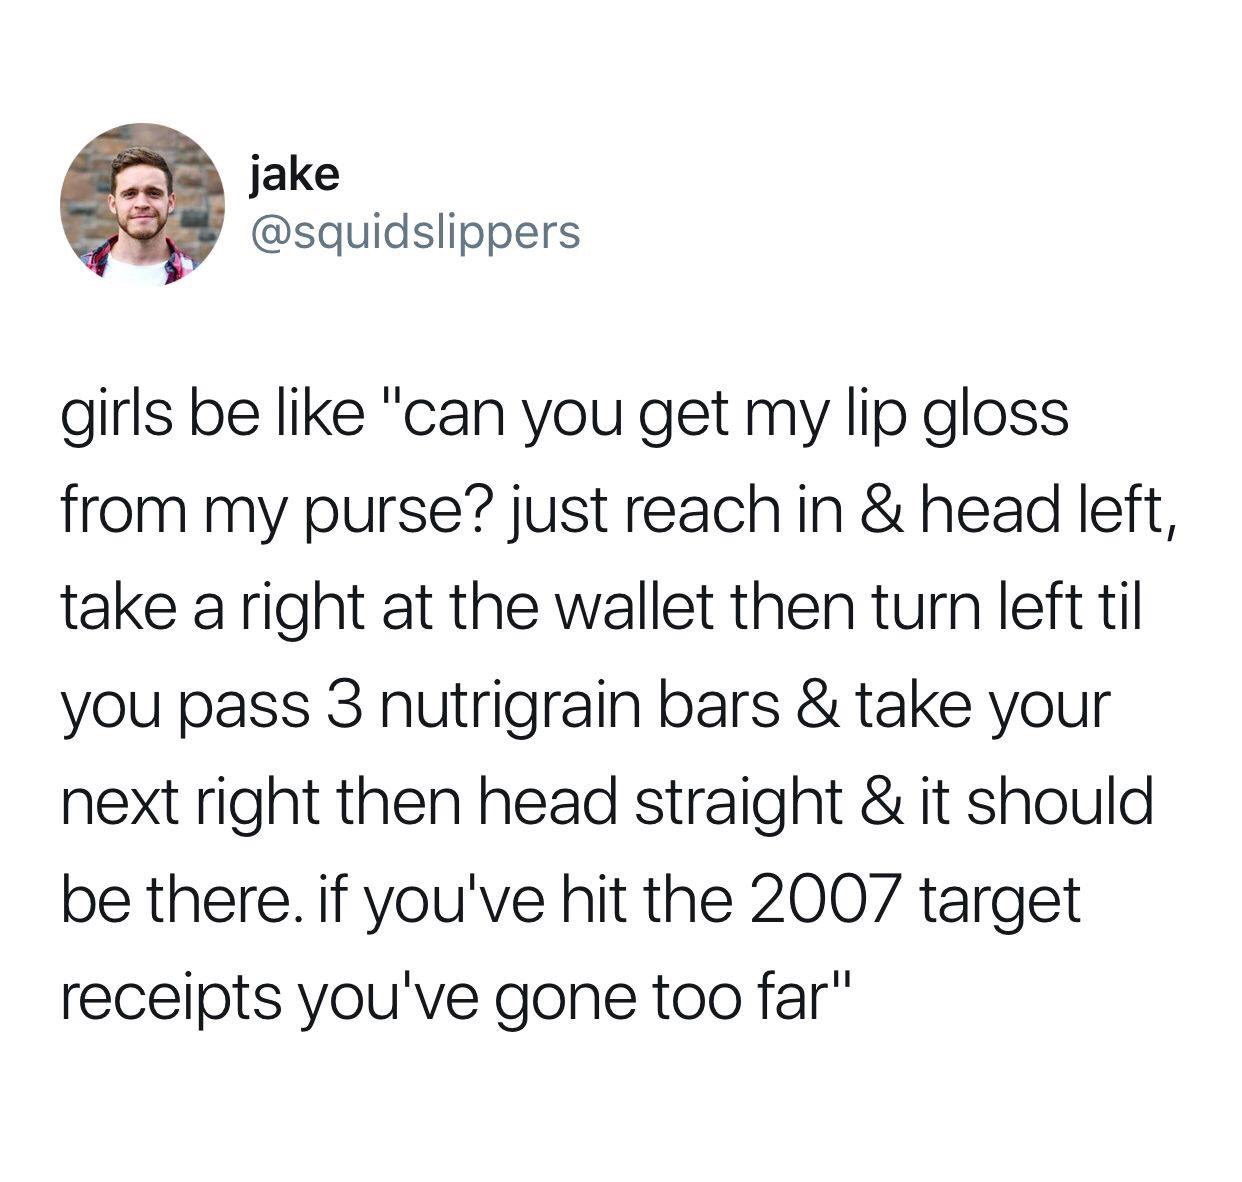 we have officially hit the point - jake girls be "can you get my lip gloss from my purse? just reach in & head left, take a right at the wallet then turn left til you pass 3 nutrigrain bars & take your next right then head straight & it should be there. i